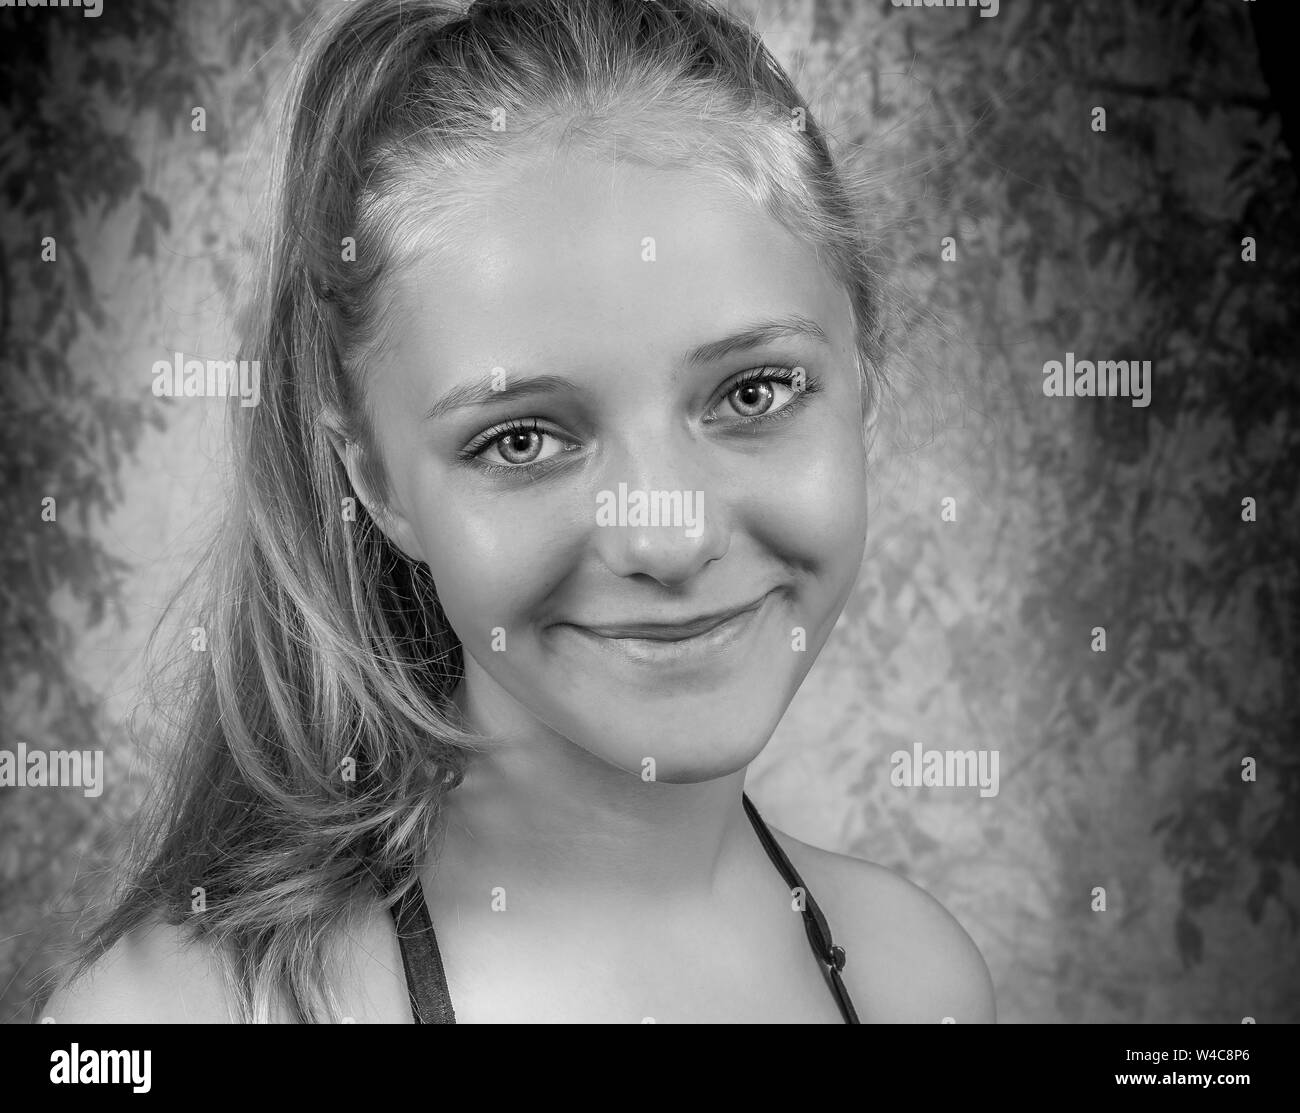 Young blond girl Stock Photo